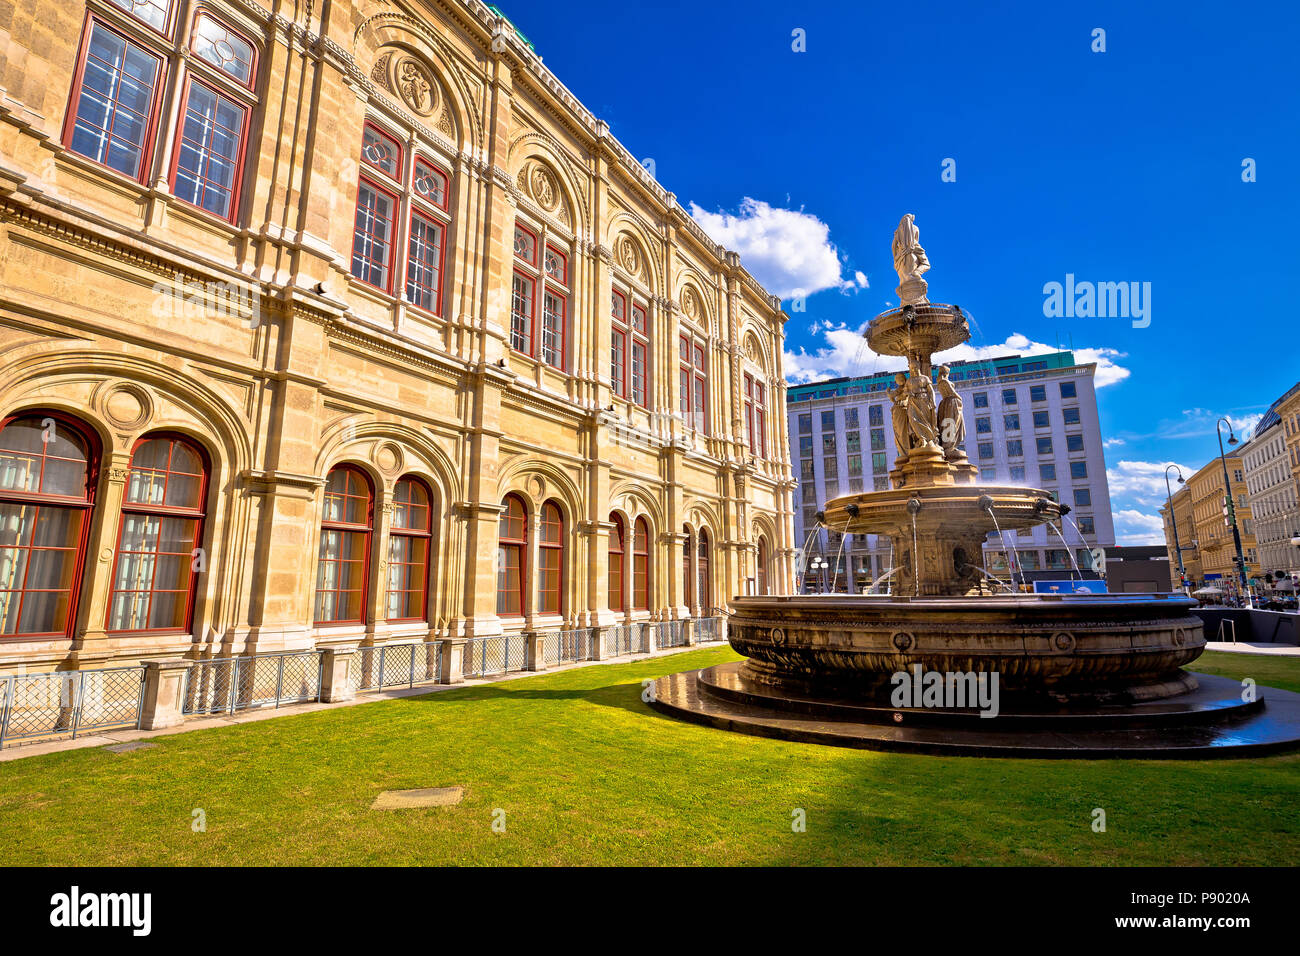 Vienna state Opera house fountain and architecture view, capital of Austria Stock Photo